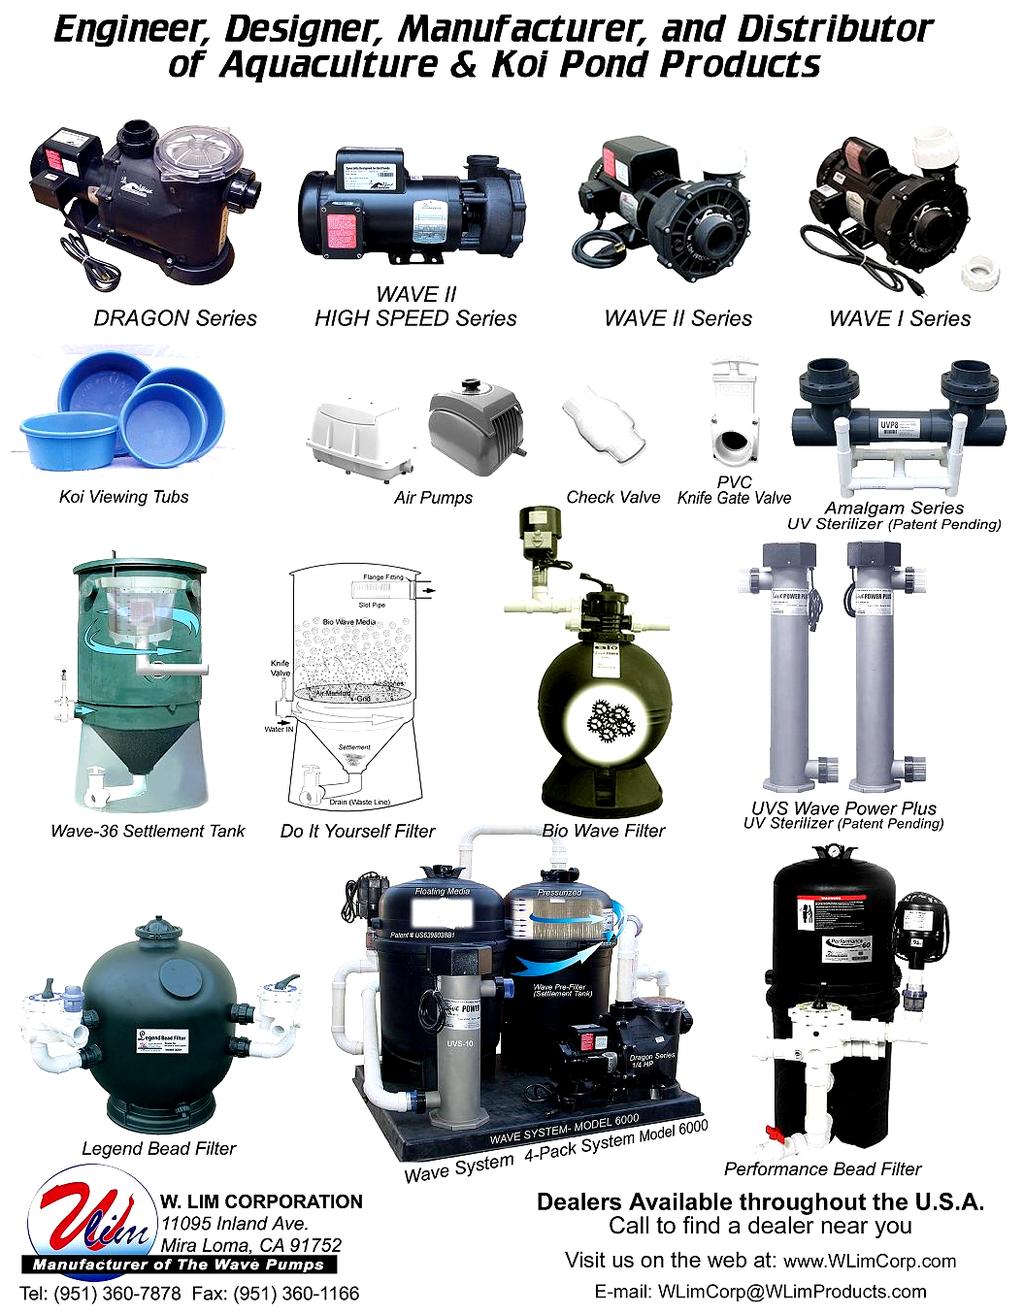 MANUFACTURER OF THE WAVE PUMP W.